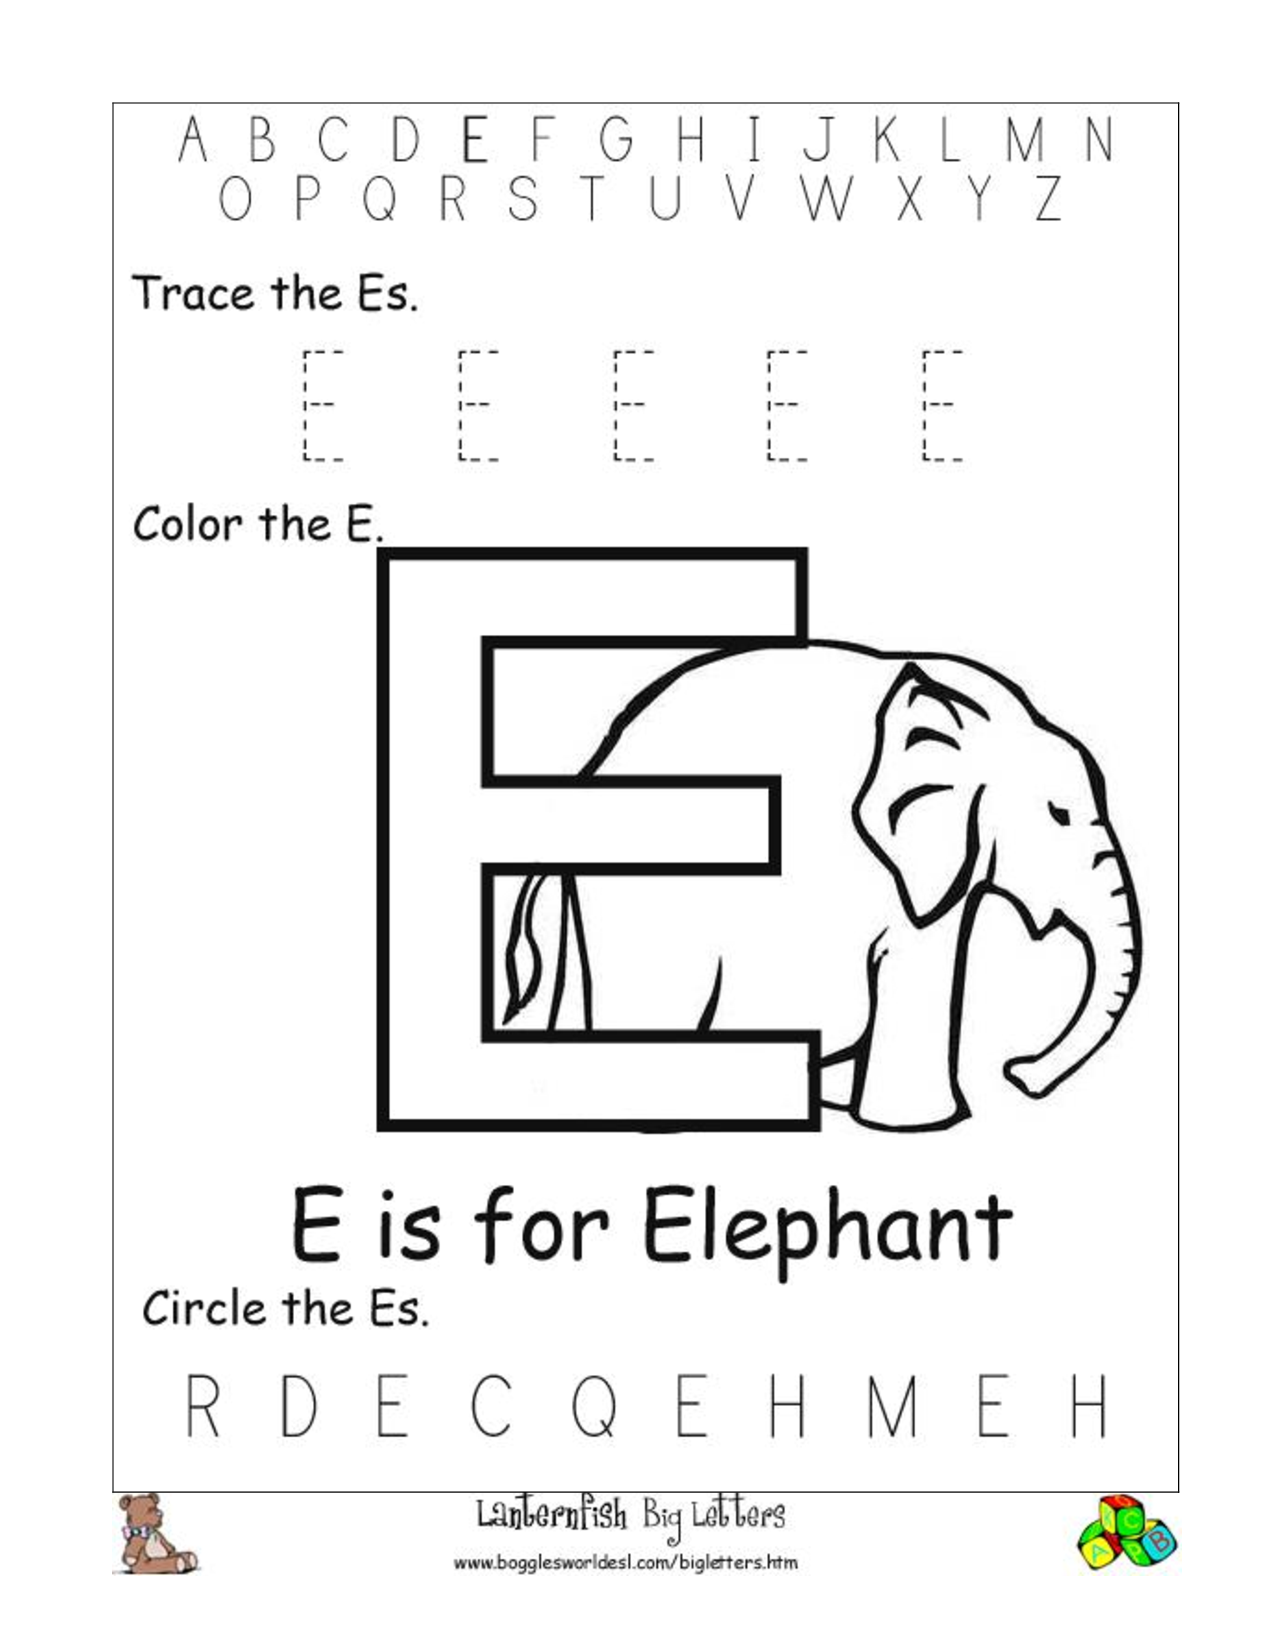 download-this-set-of-free-printable-alphabet-worksheets-they-ll-help